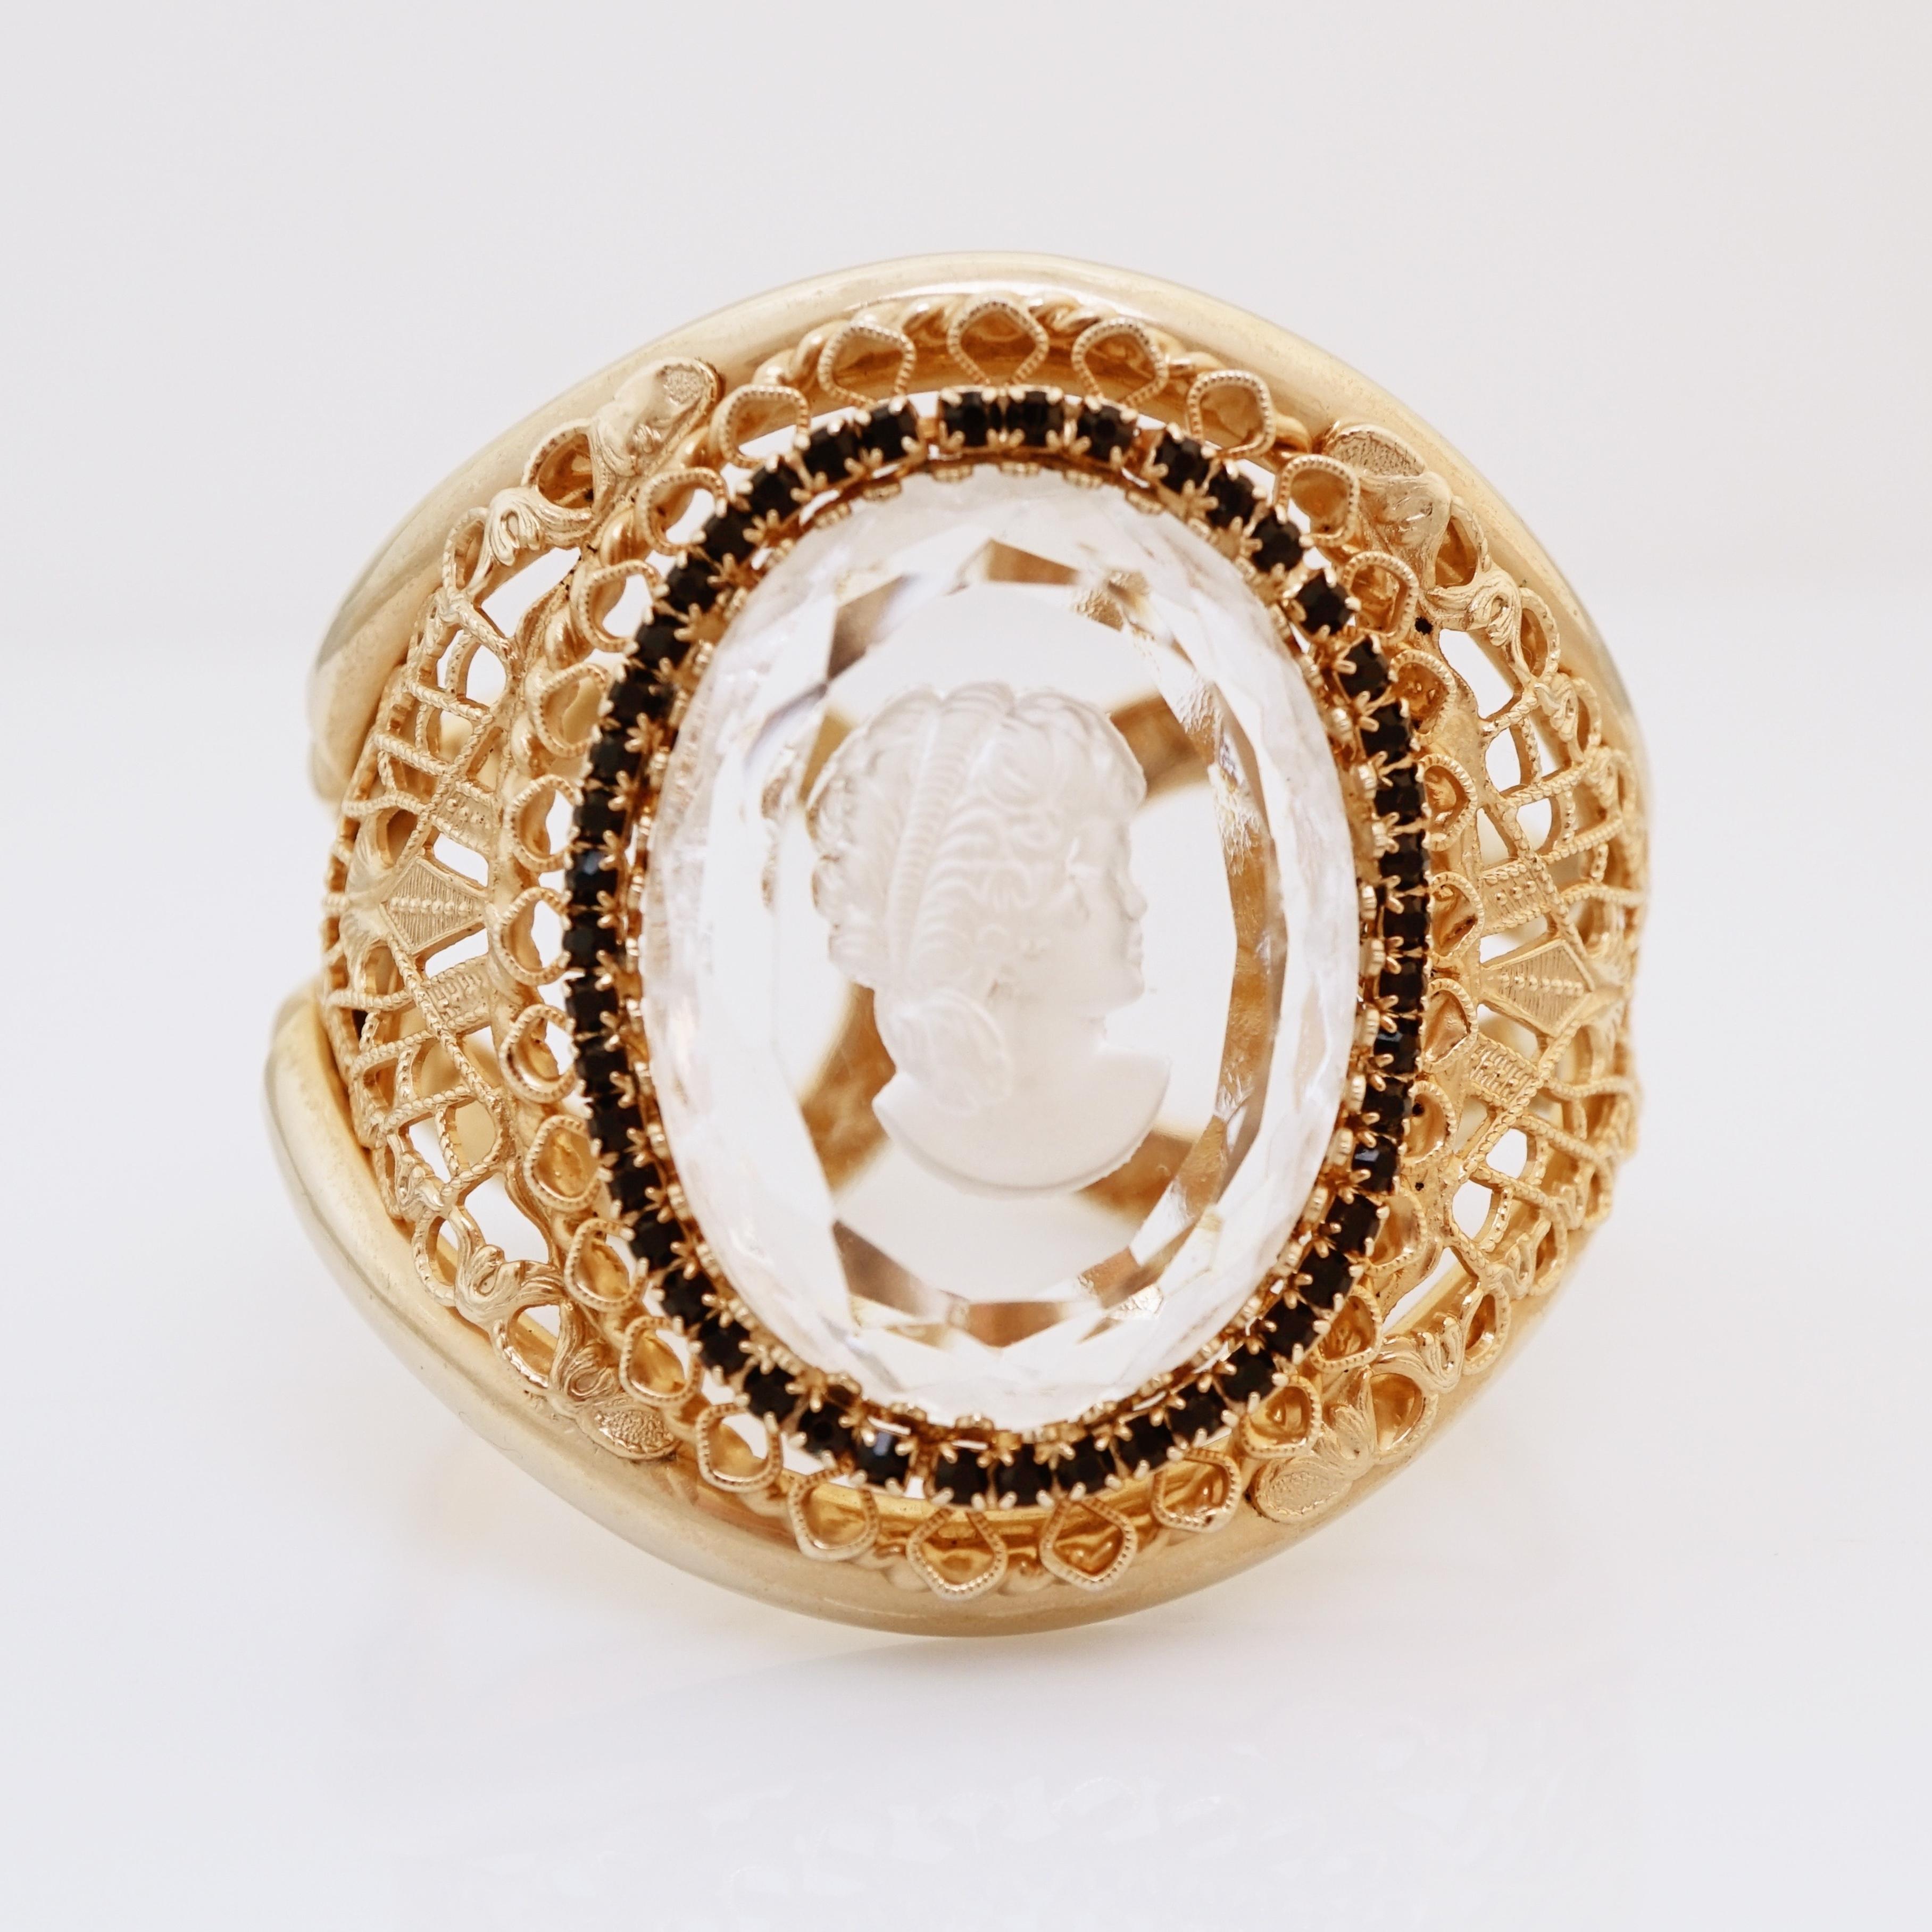 - Vintage item

- Collectible costume jewelry piece from the mid-century

- Gold plated hardware

- 7